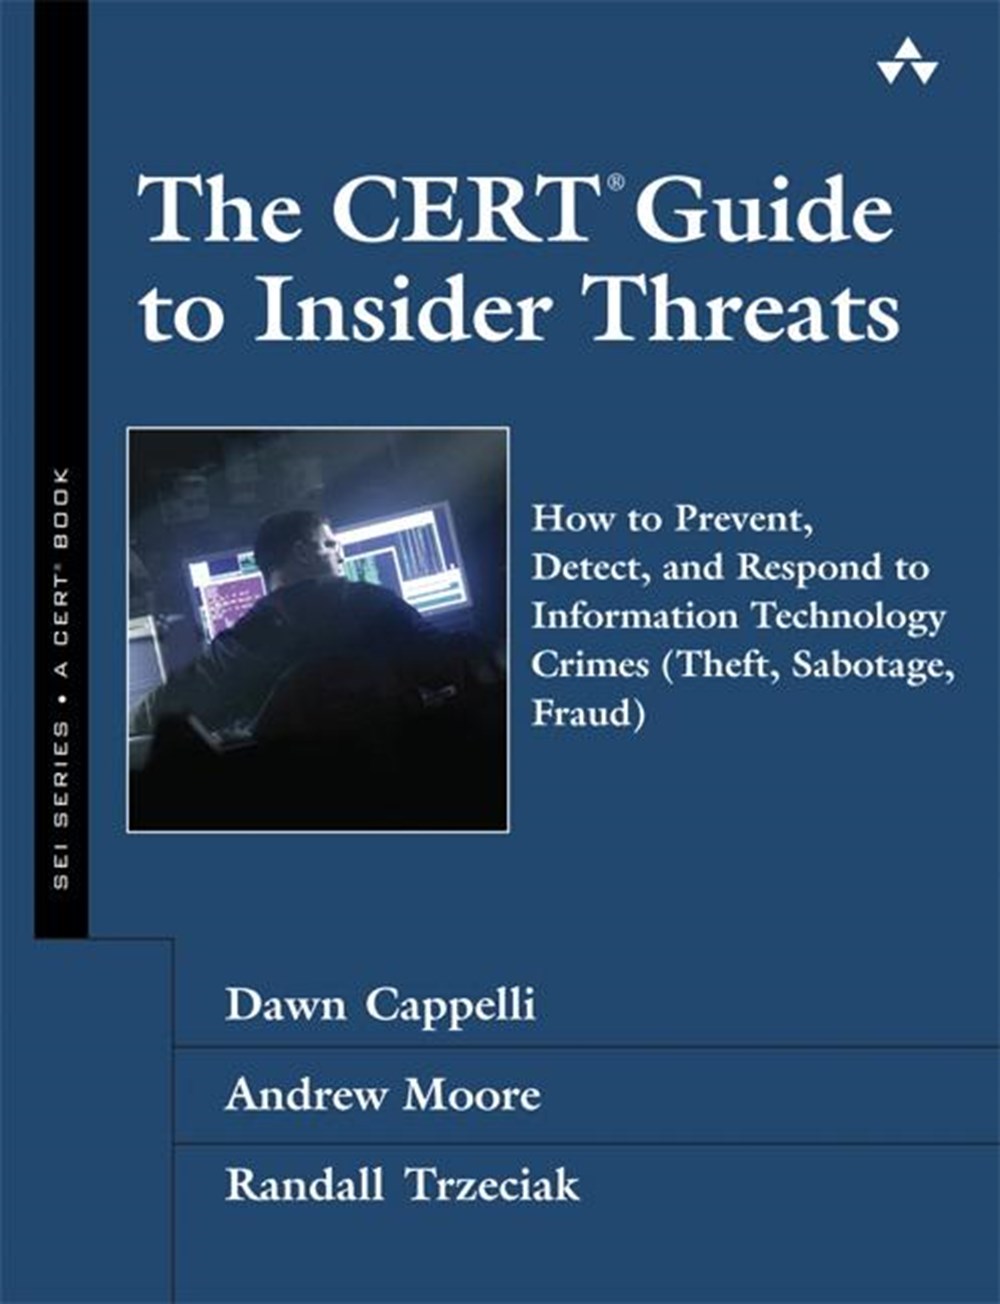 CERT Guide to Insider Threats How to Prevent, Detect, and Respond to Information Technology Crimes (